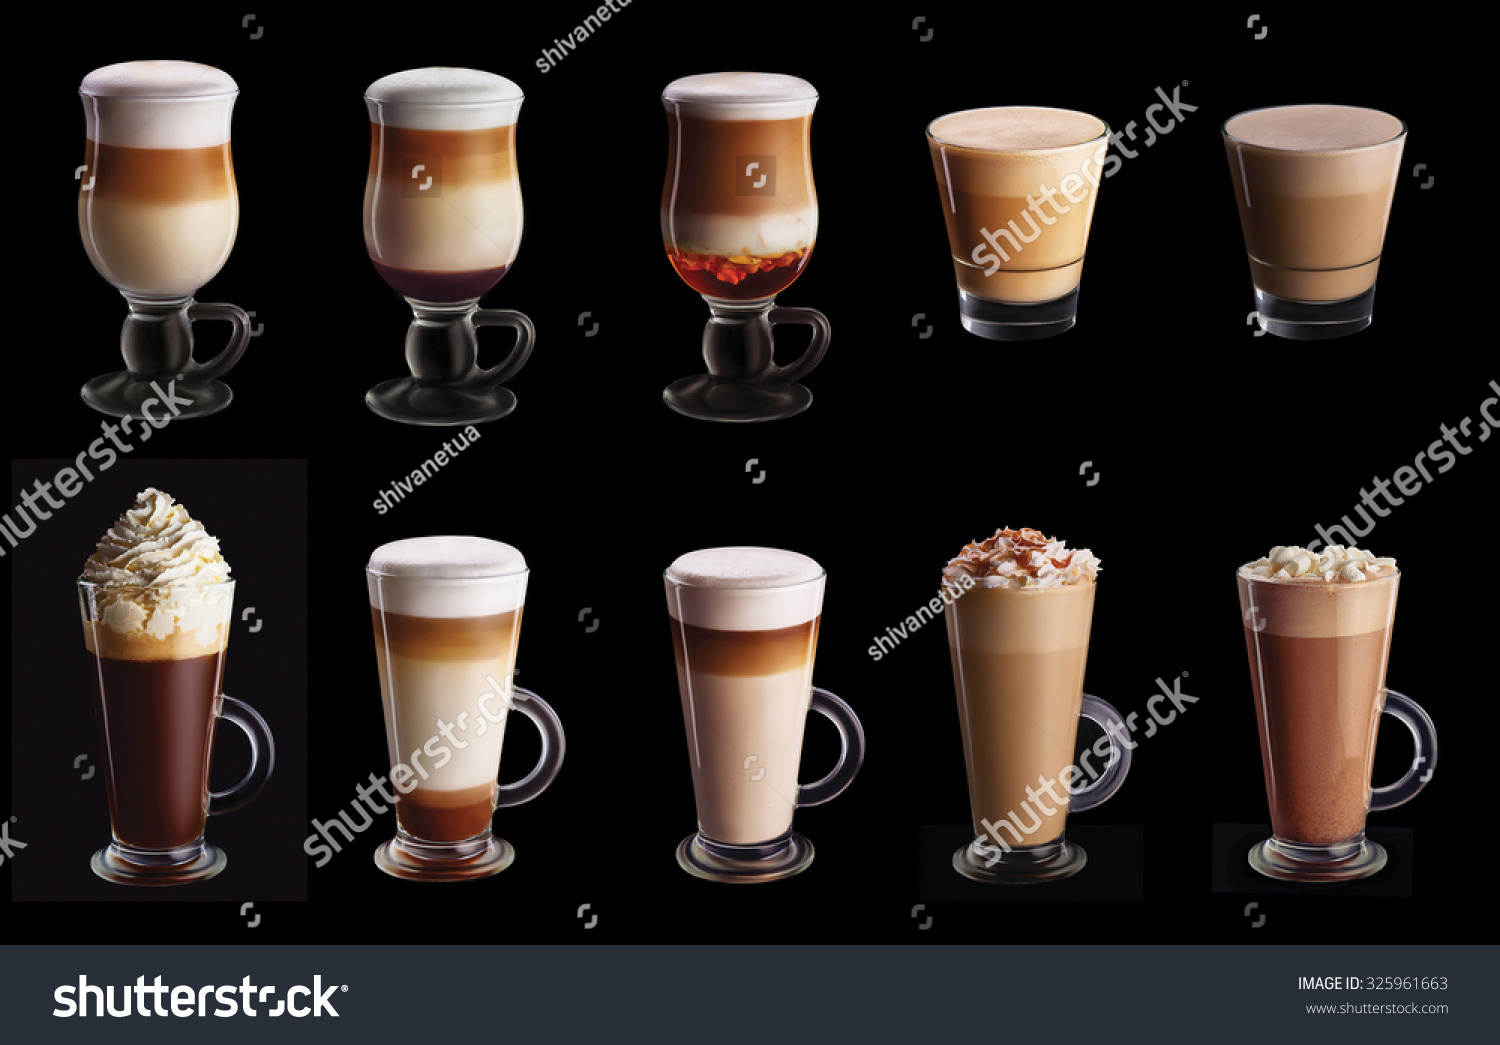 Ten coffee coctails collage set isolated on black background #325961663